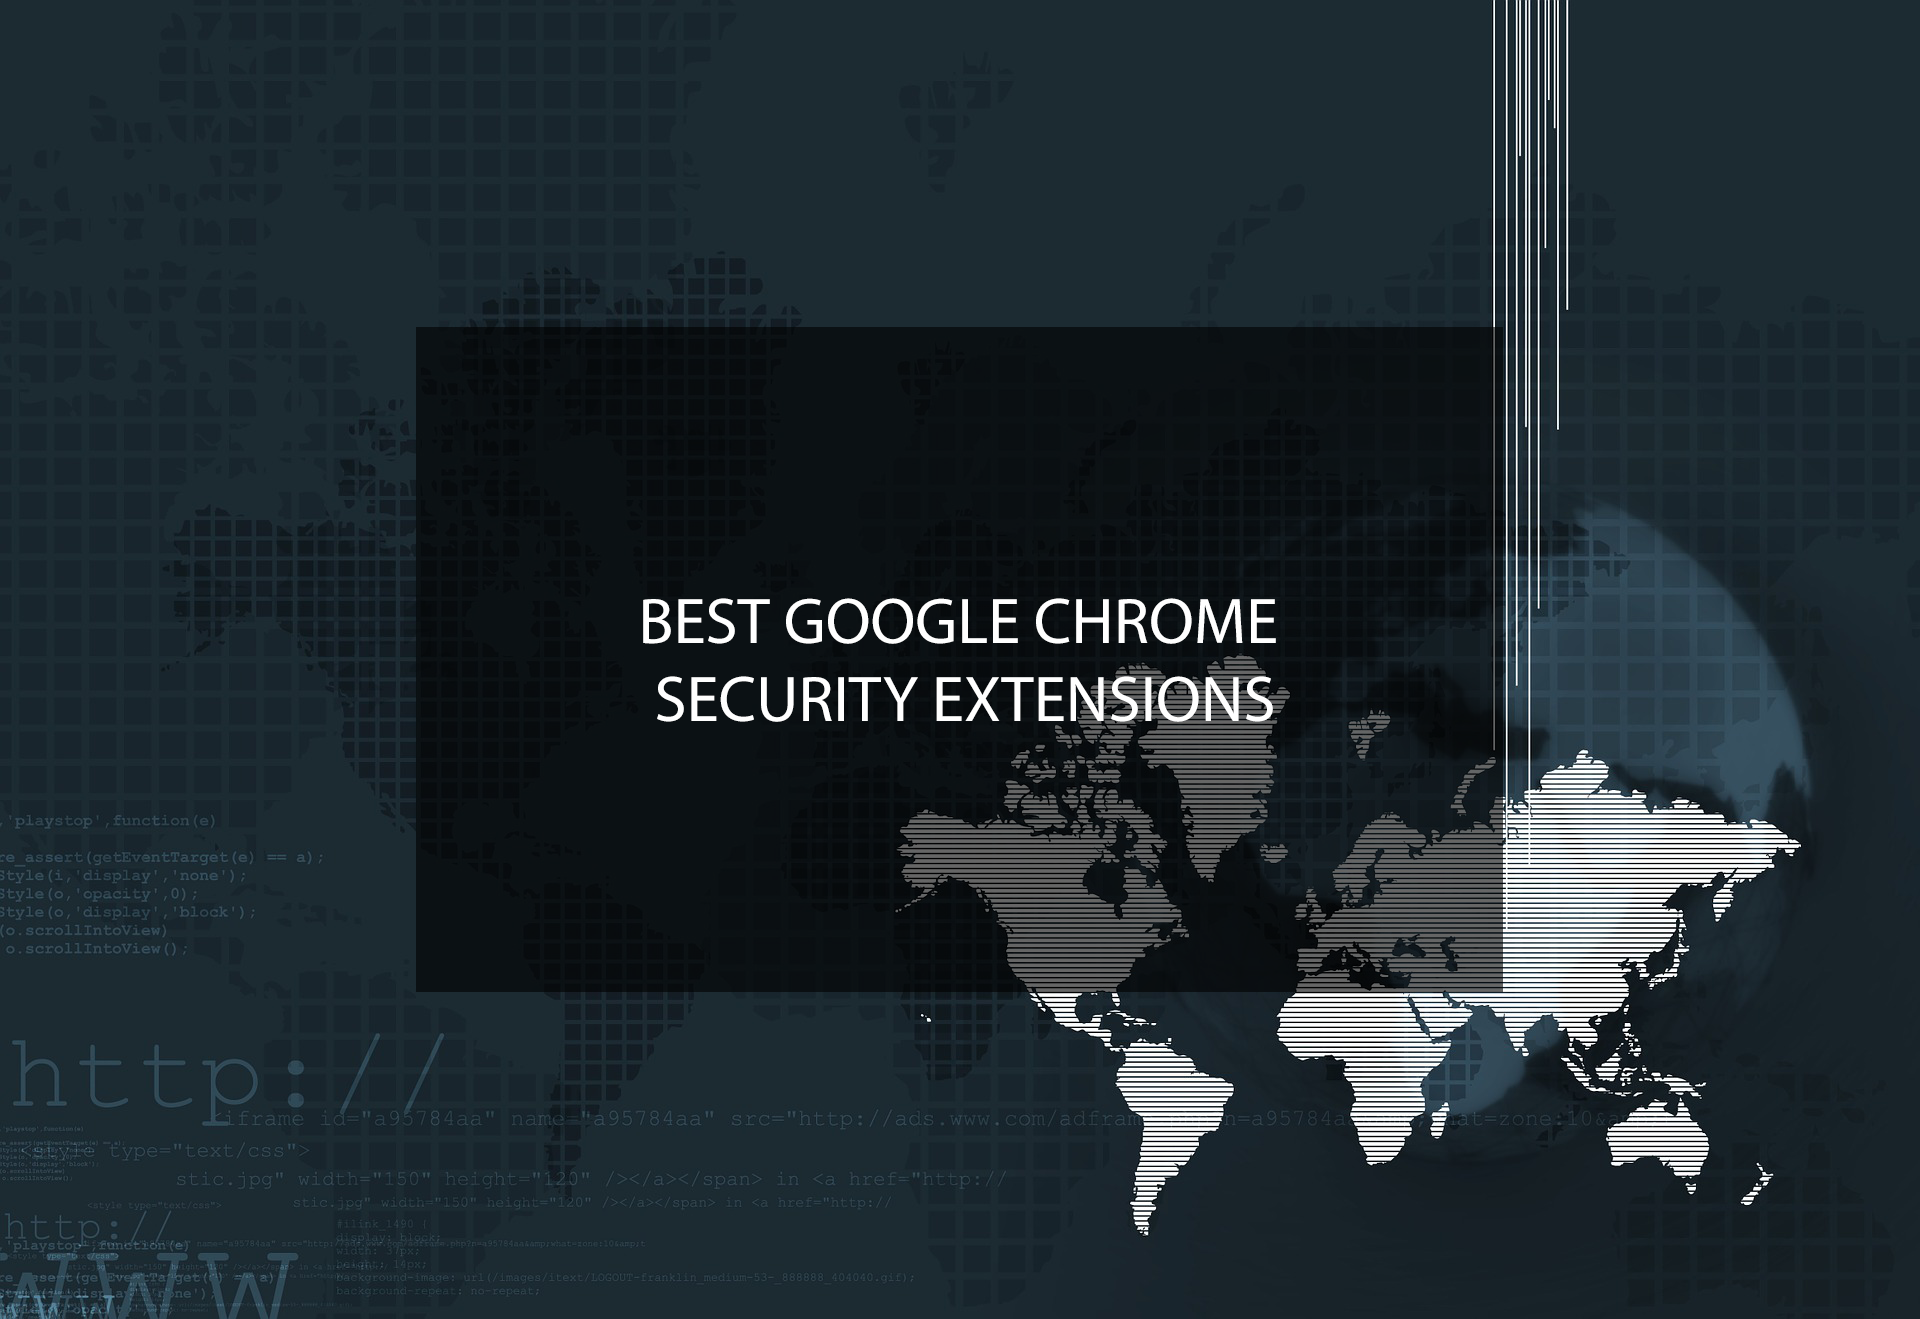 Best Google Chrome Security Extensions